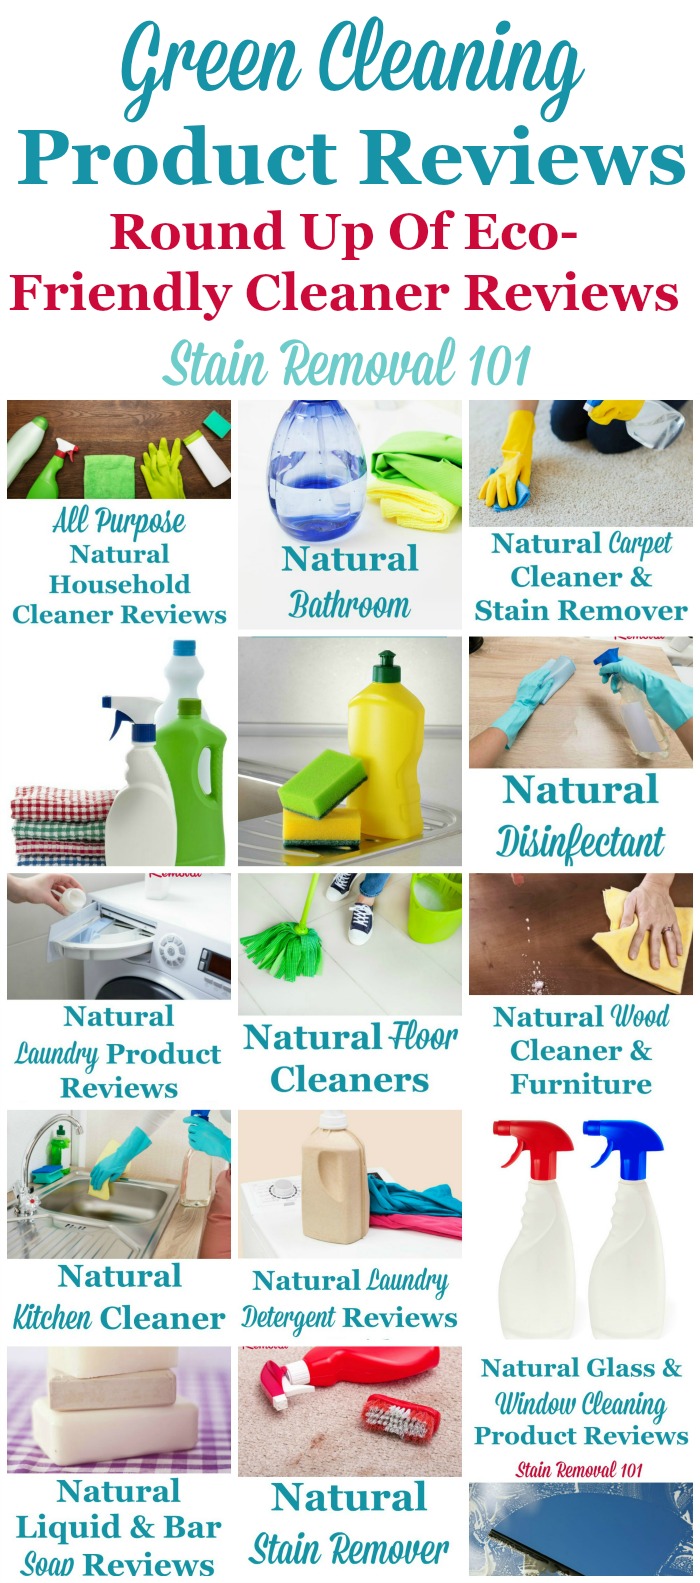 https://www.stain-removal-101.com/image-files/green-cleaning-products-2.jpg